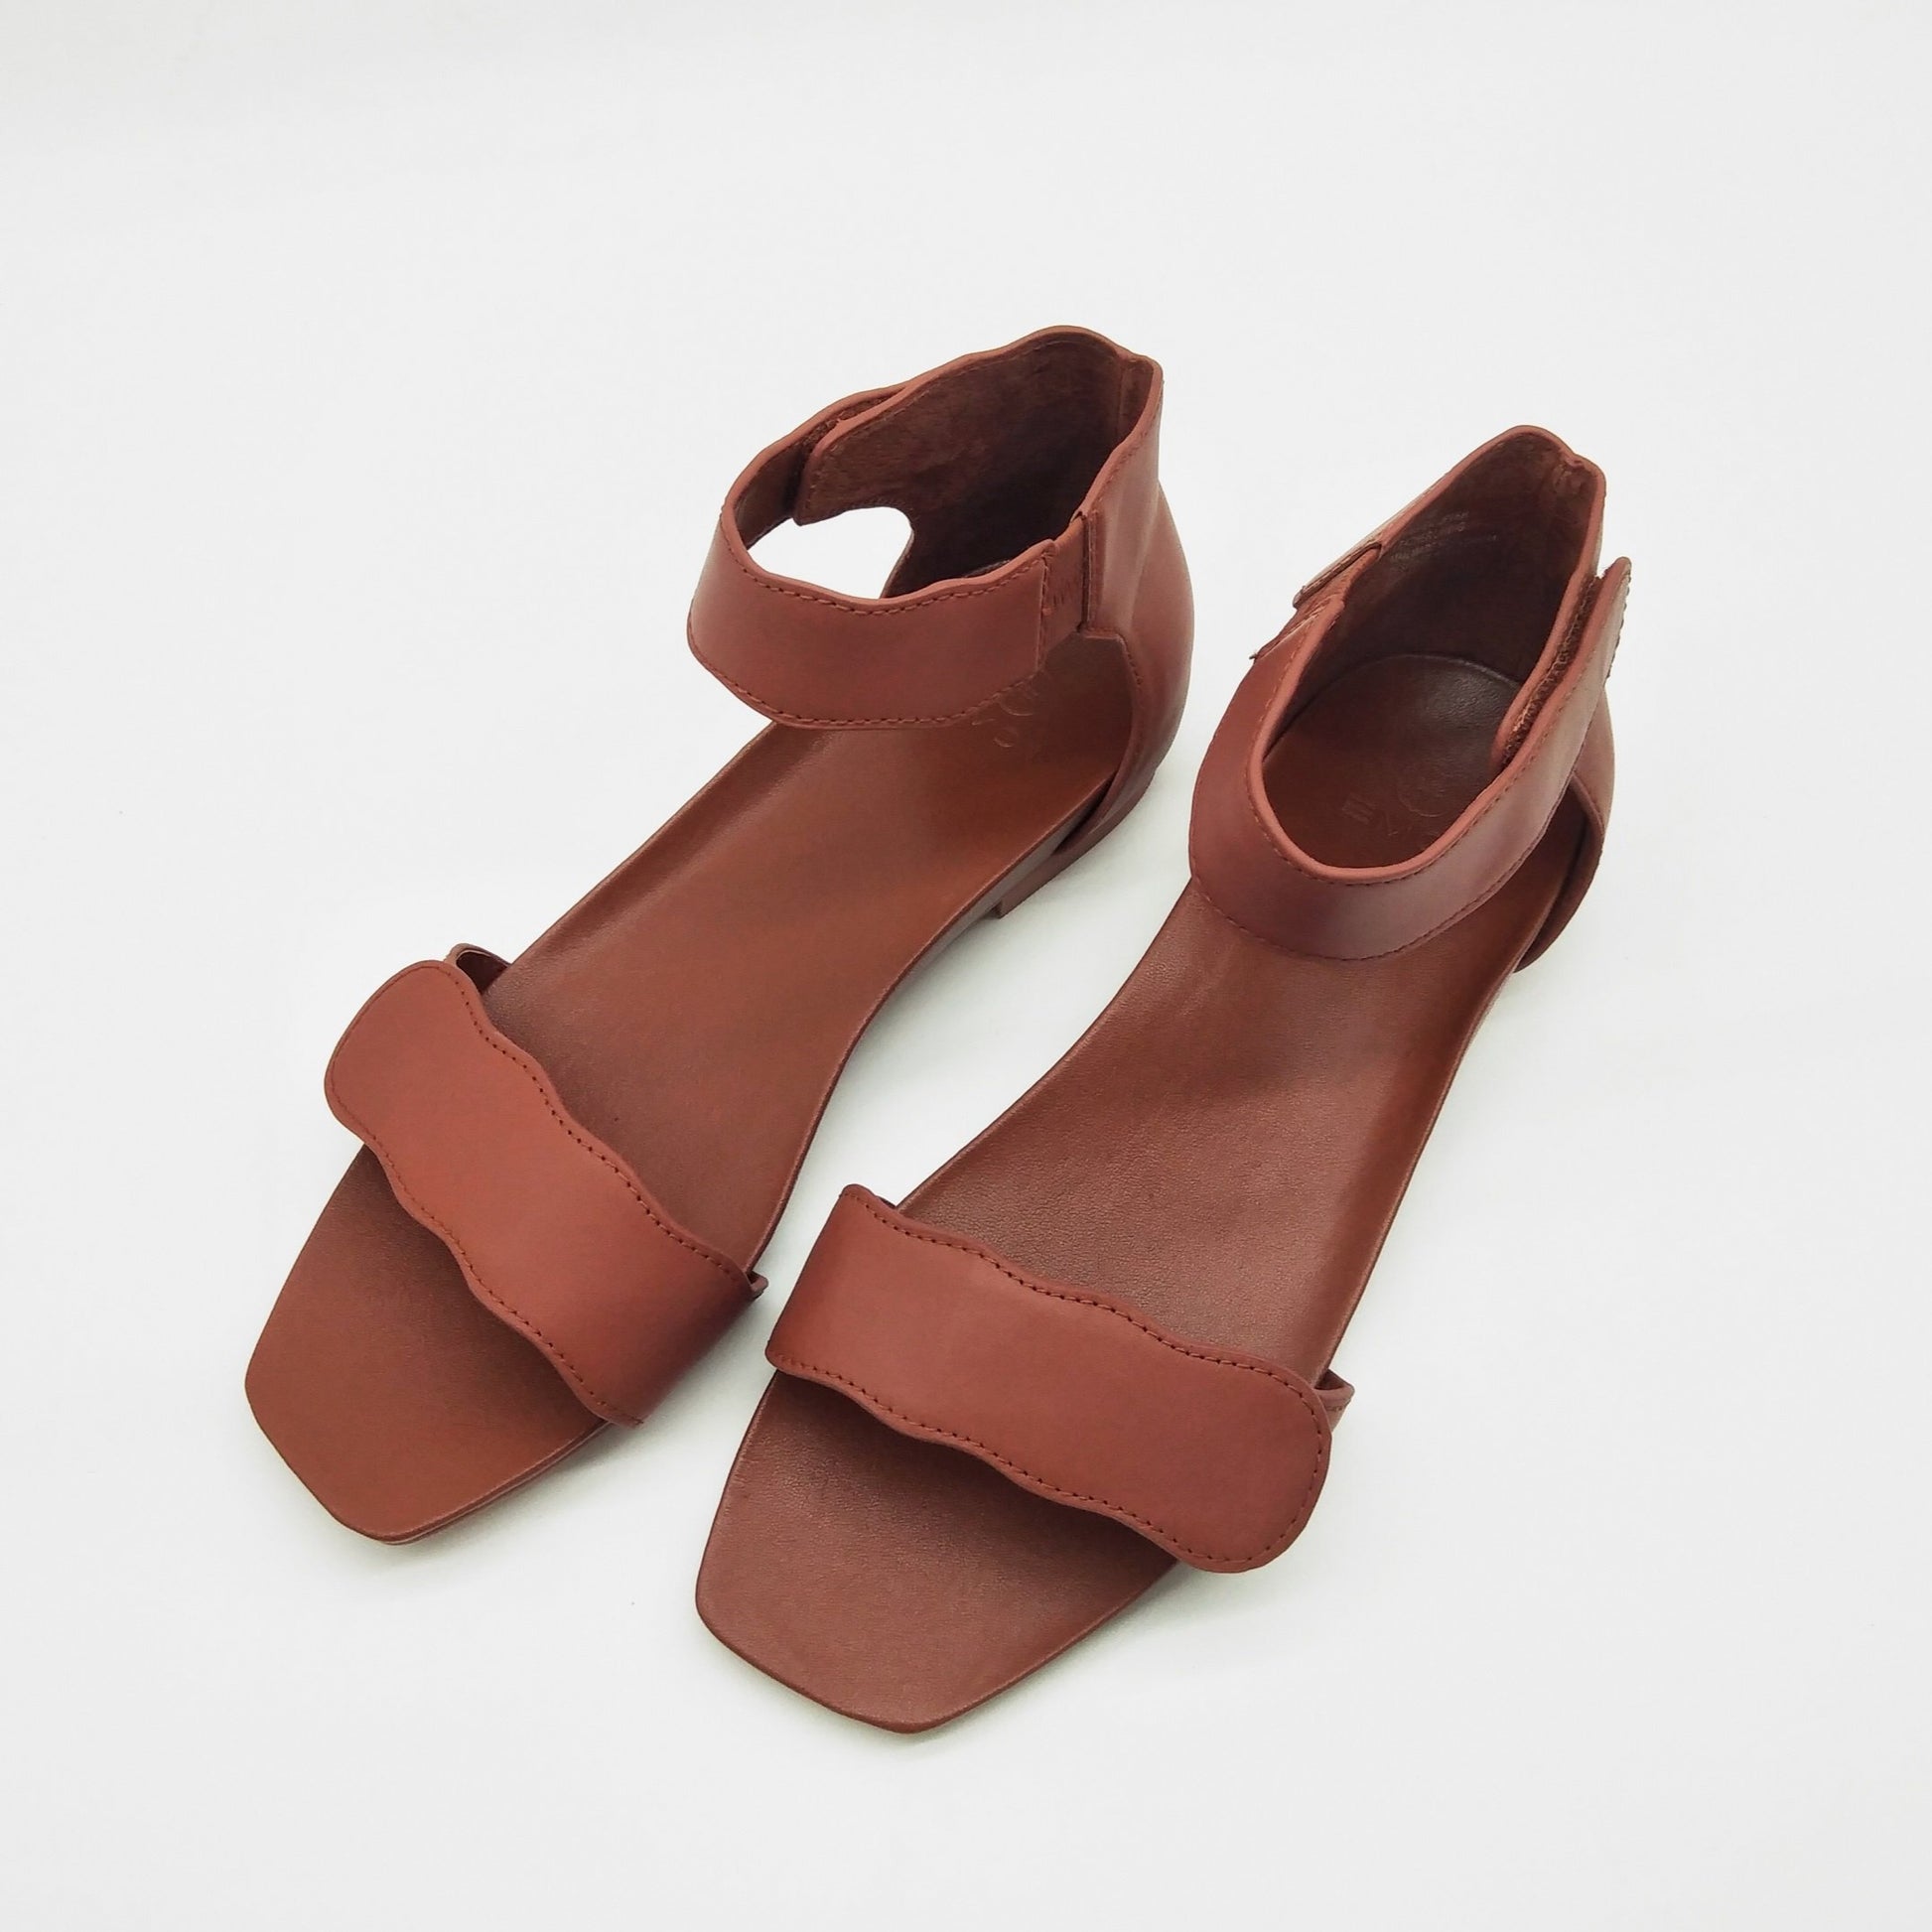 Light-weight Tan leather sandals with adjustable strapes and arch support. Bio-contoured footbed, wide feet friendly